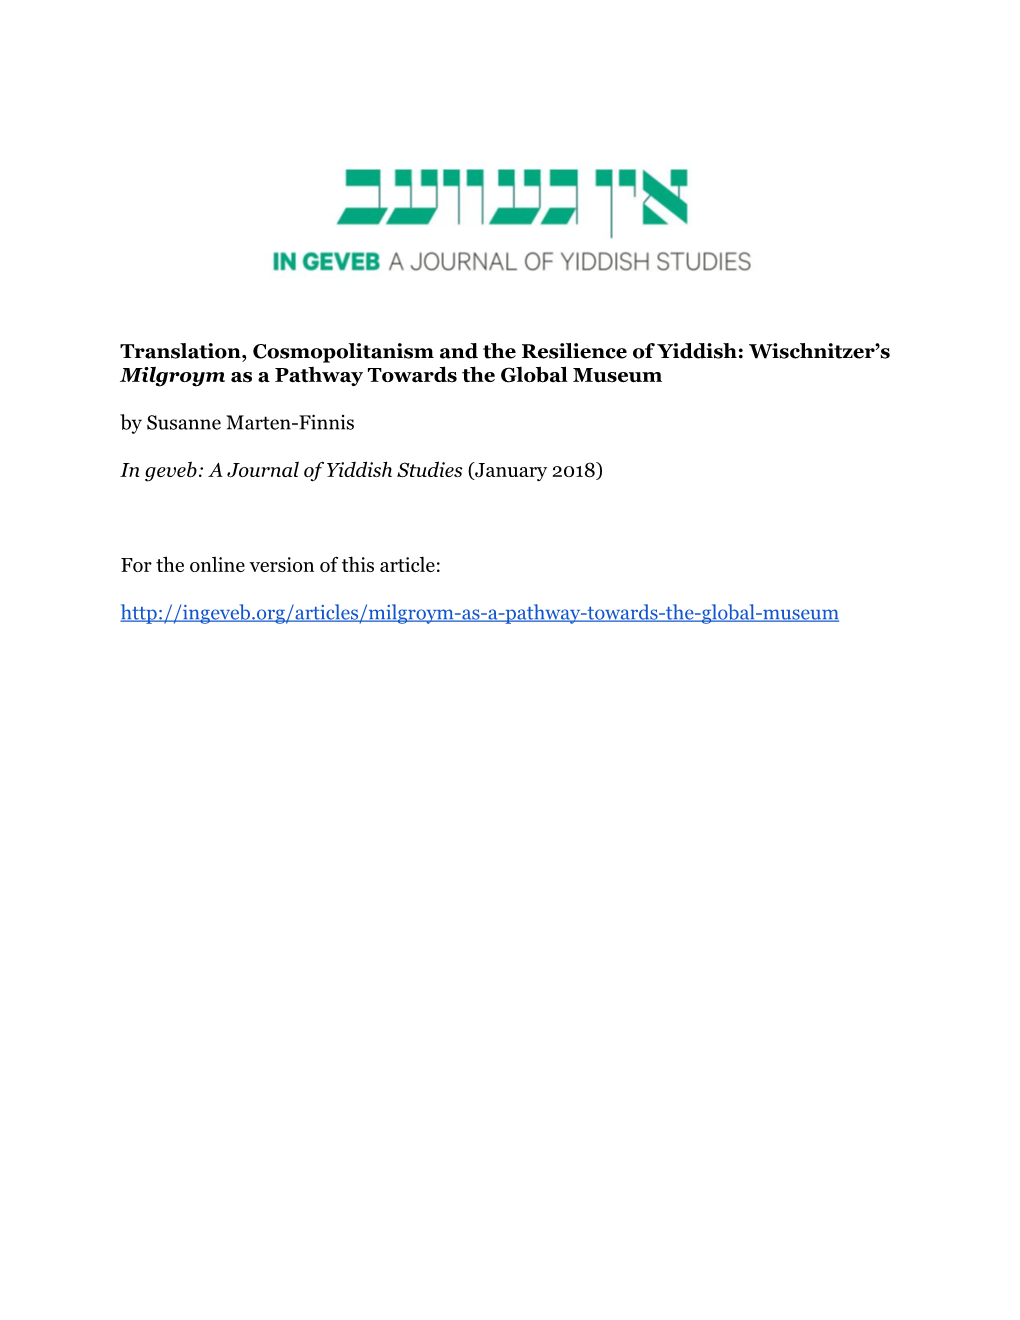 Translation, Cosmopolitanism and the Resilience of Yiddish: Wischnitzer's